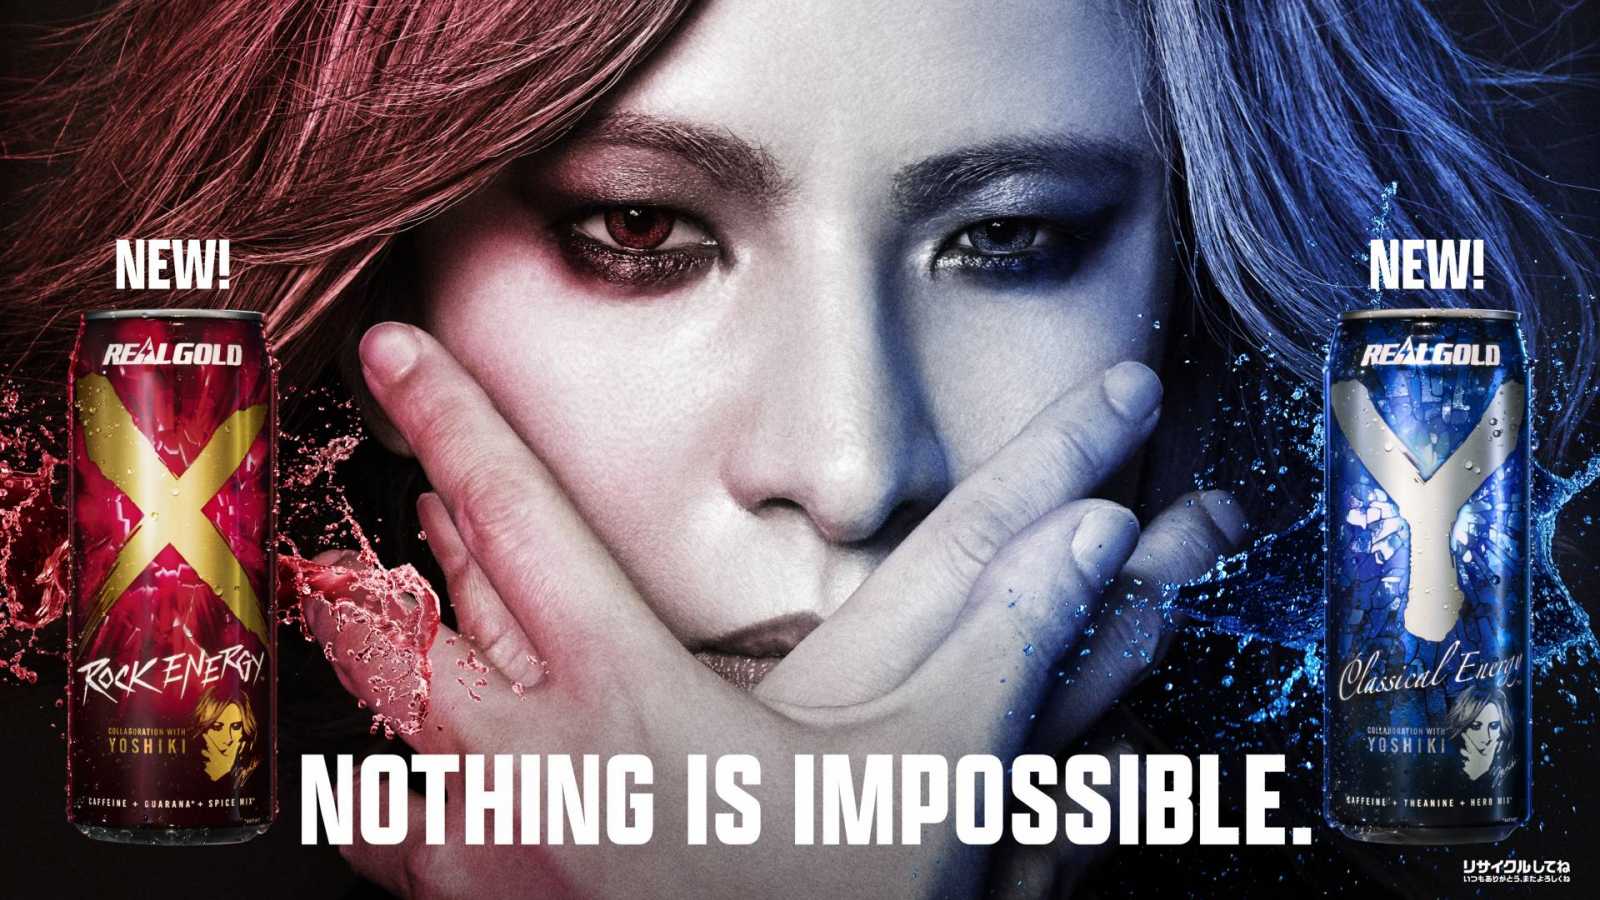 YOSHIKI Partners with Coca-Cola to Launch Two Music-Inspired Energy Drinks © YOSHIKI. All rights reserved.